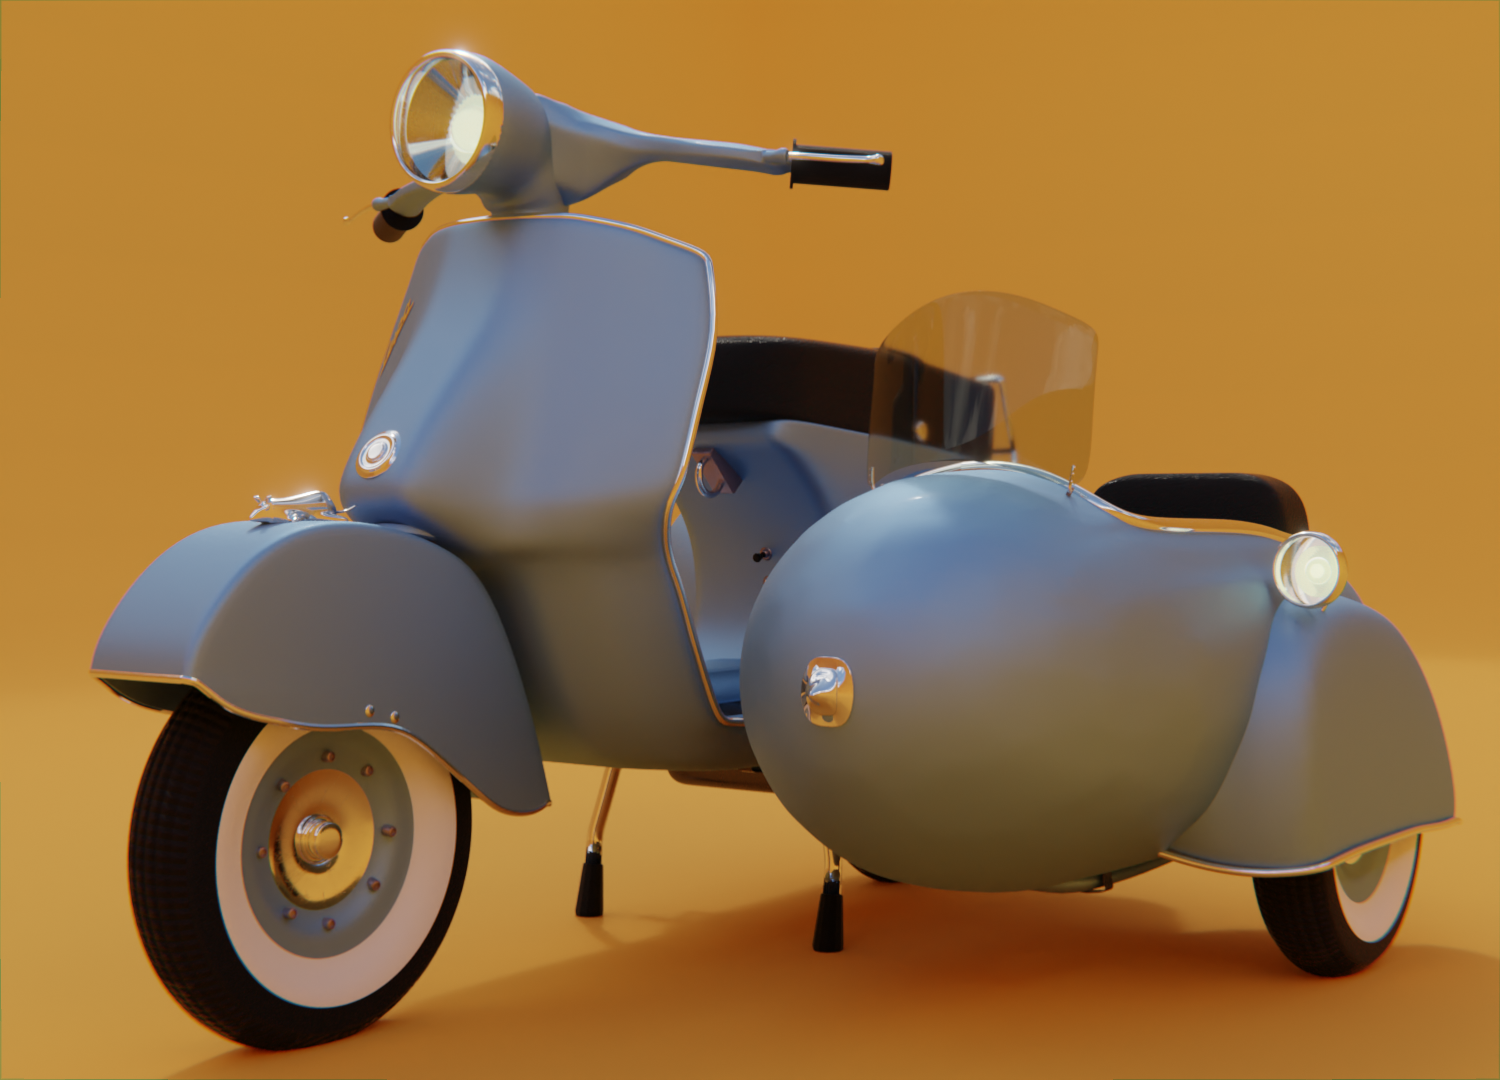 Vintage Vespa frontrightview